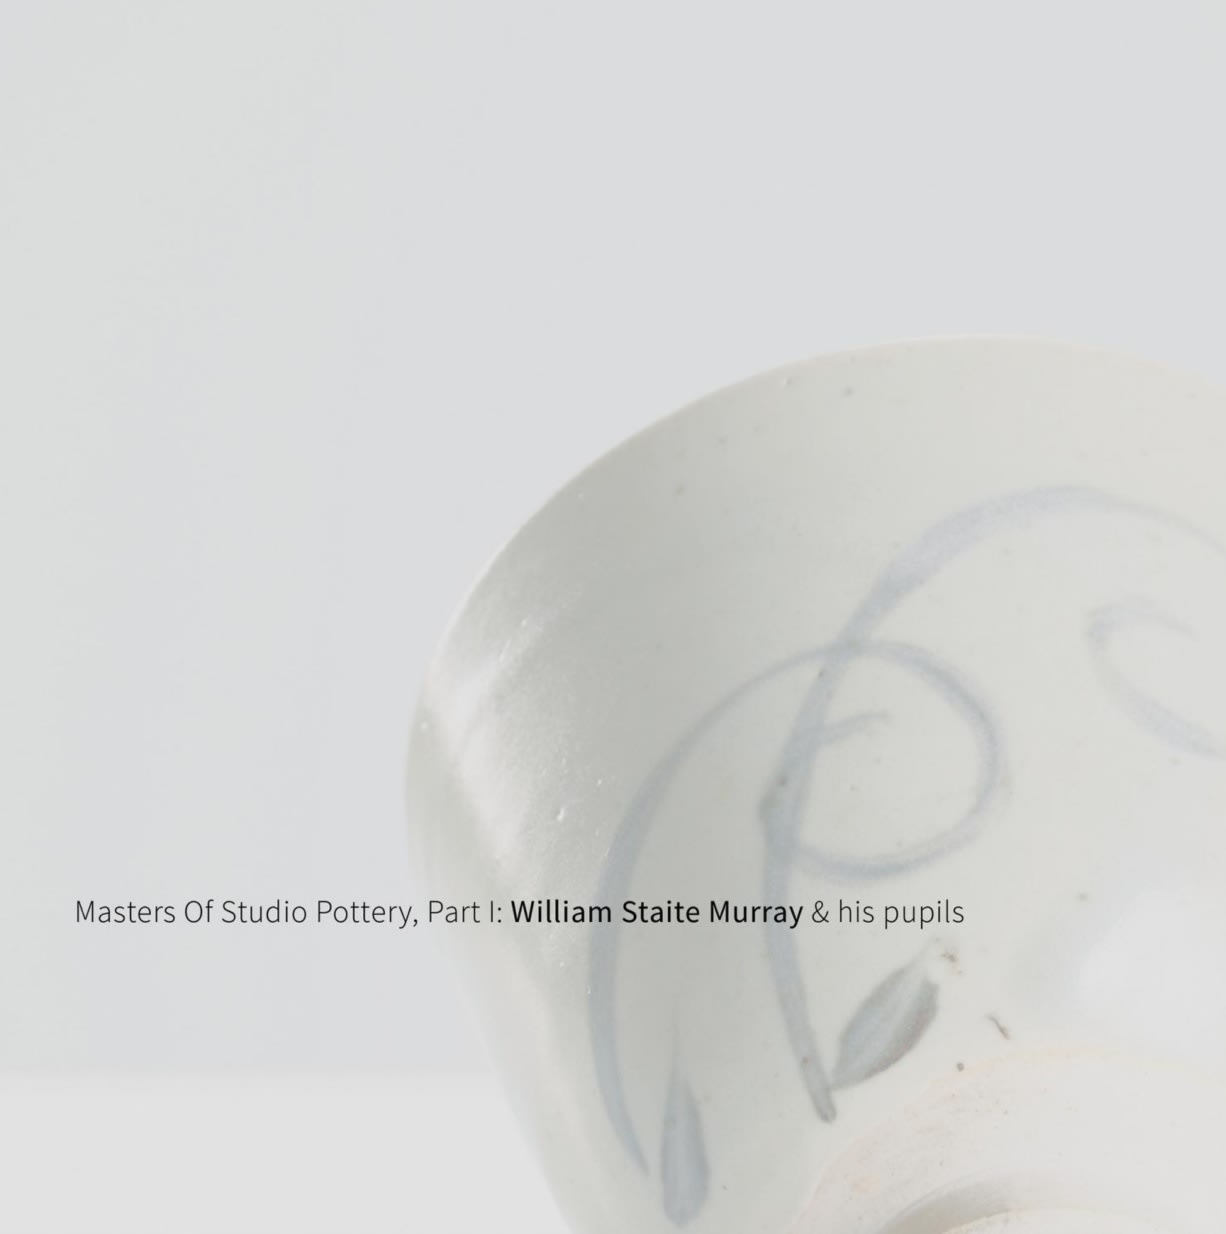 MASTERS OF STUDIO POTTERY, PART I / WILLIAM STAITE MURRAY & HIS PUPILS